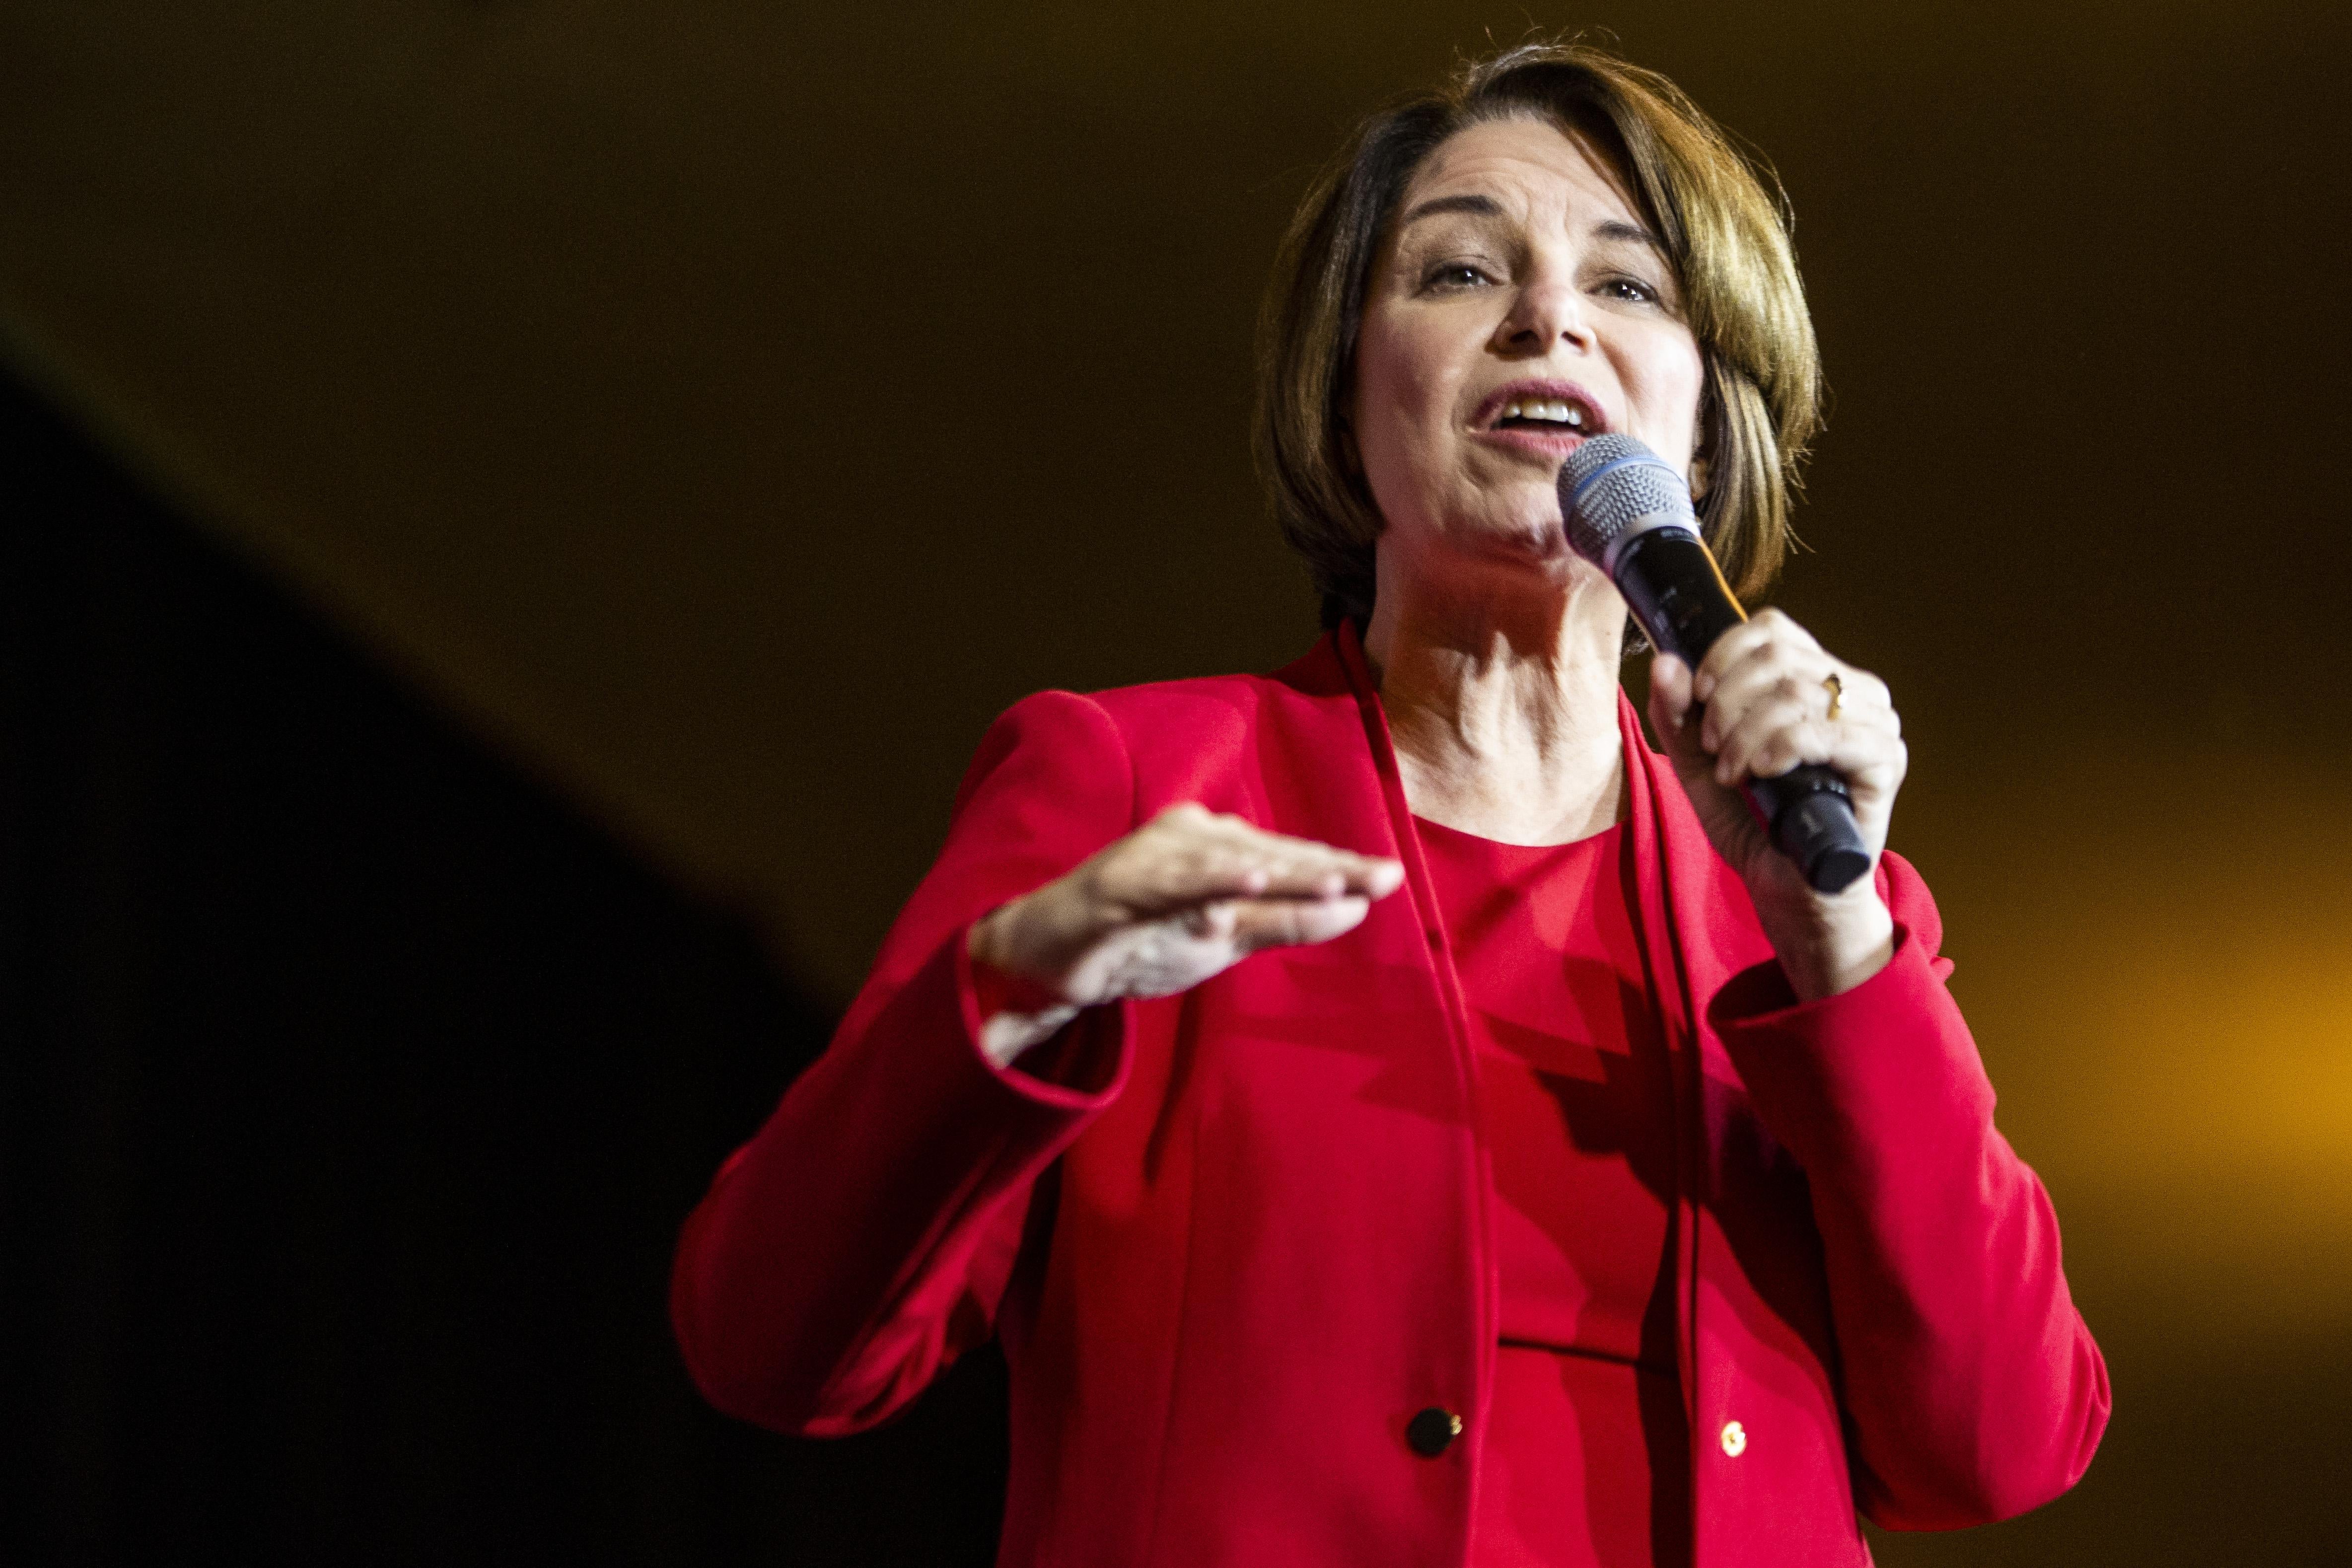 Amy Klobuchar gestures with one hand while holding a microphone in the other.